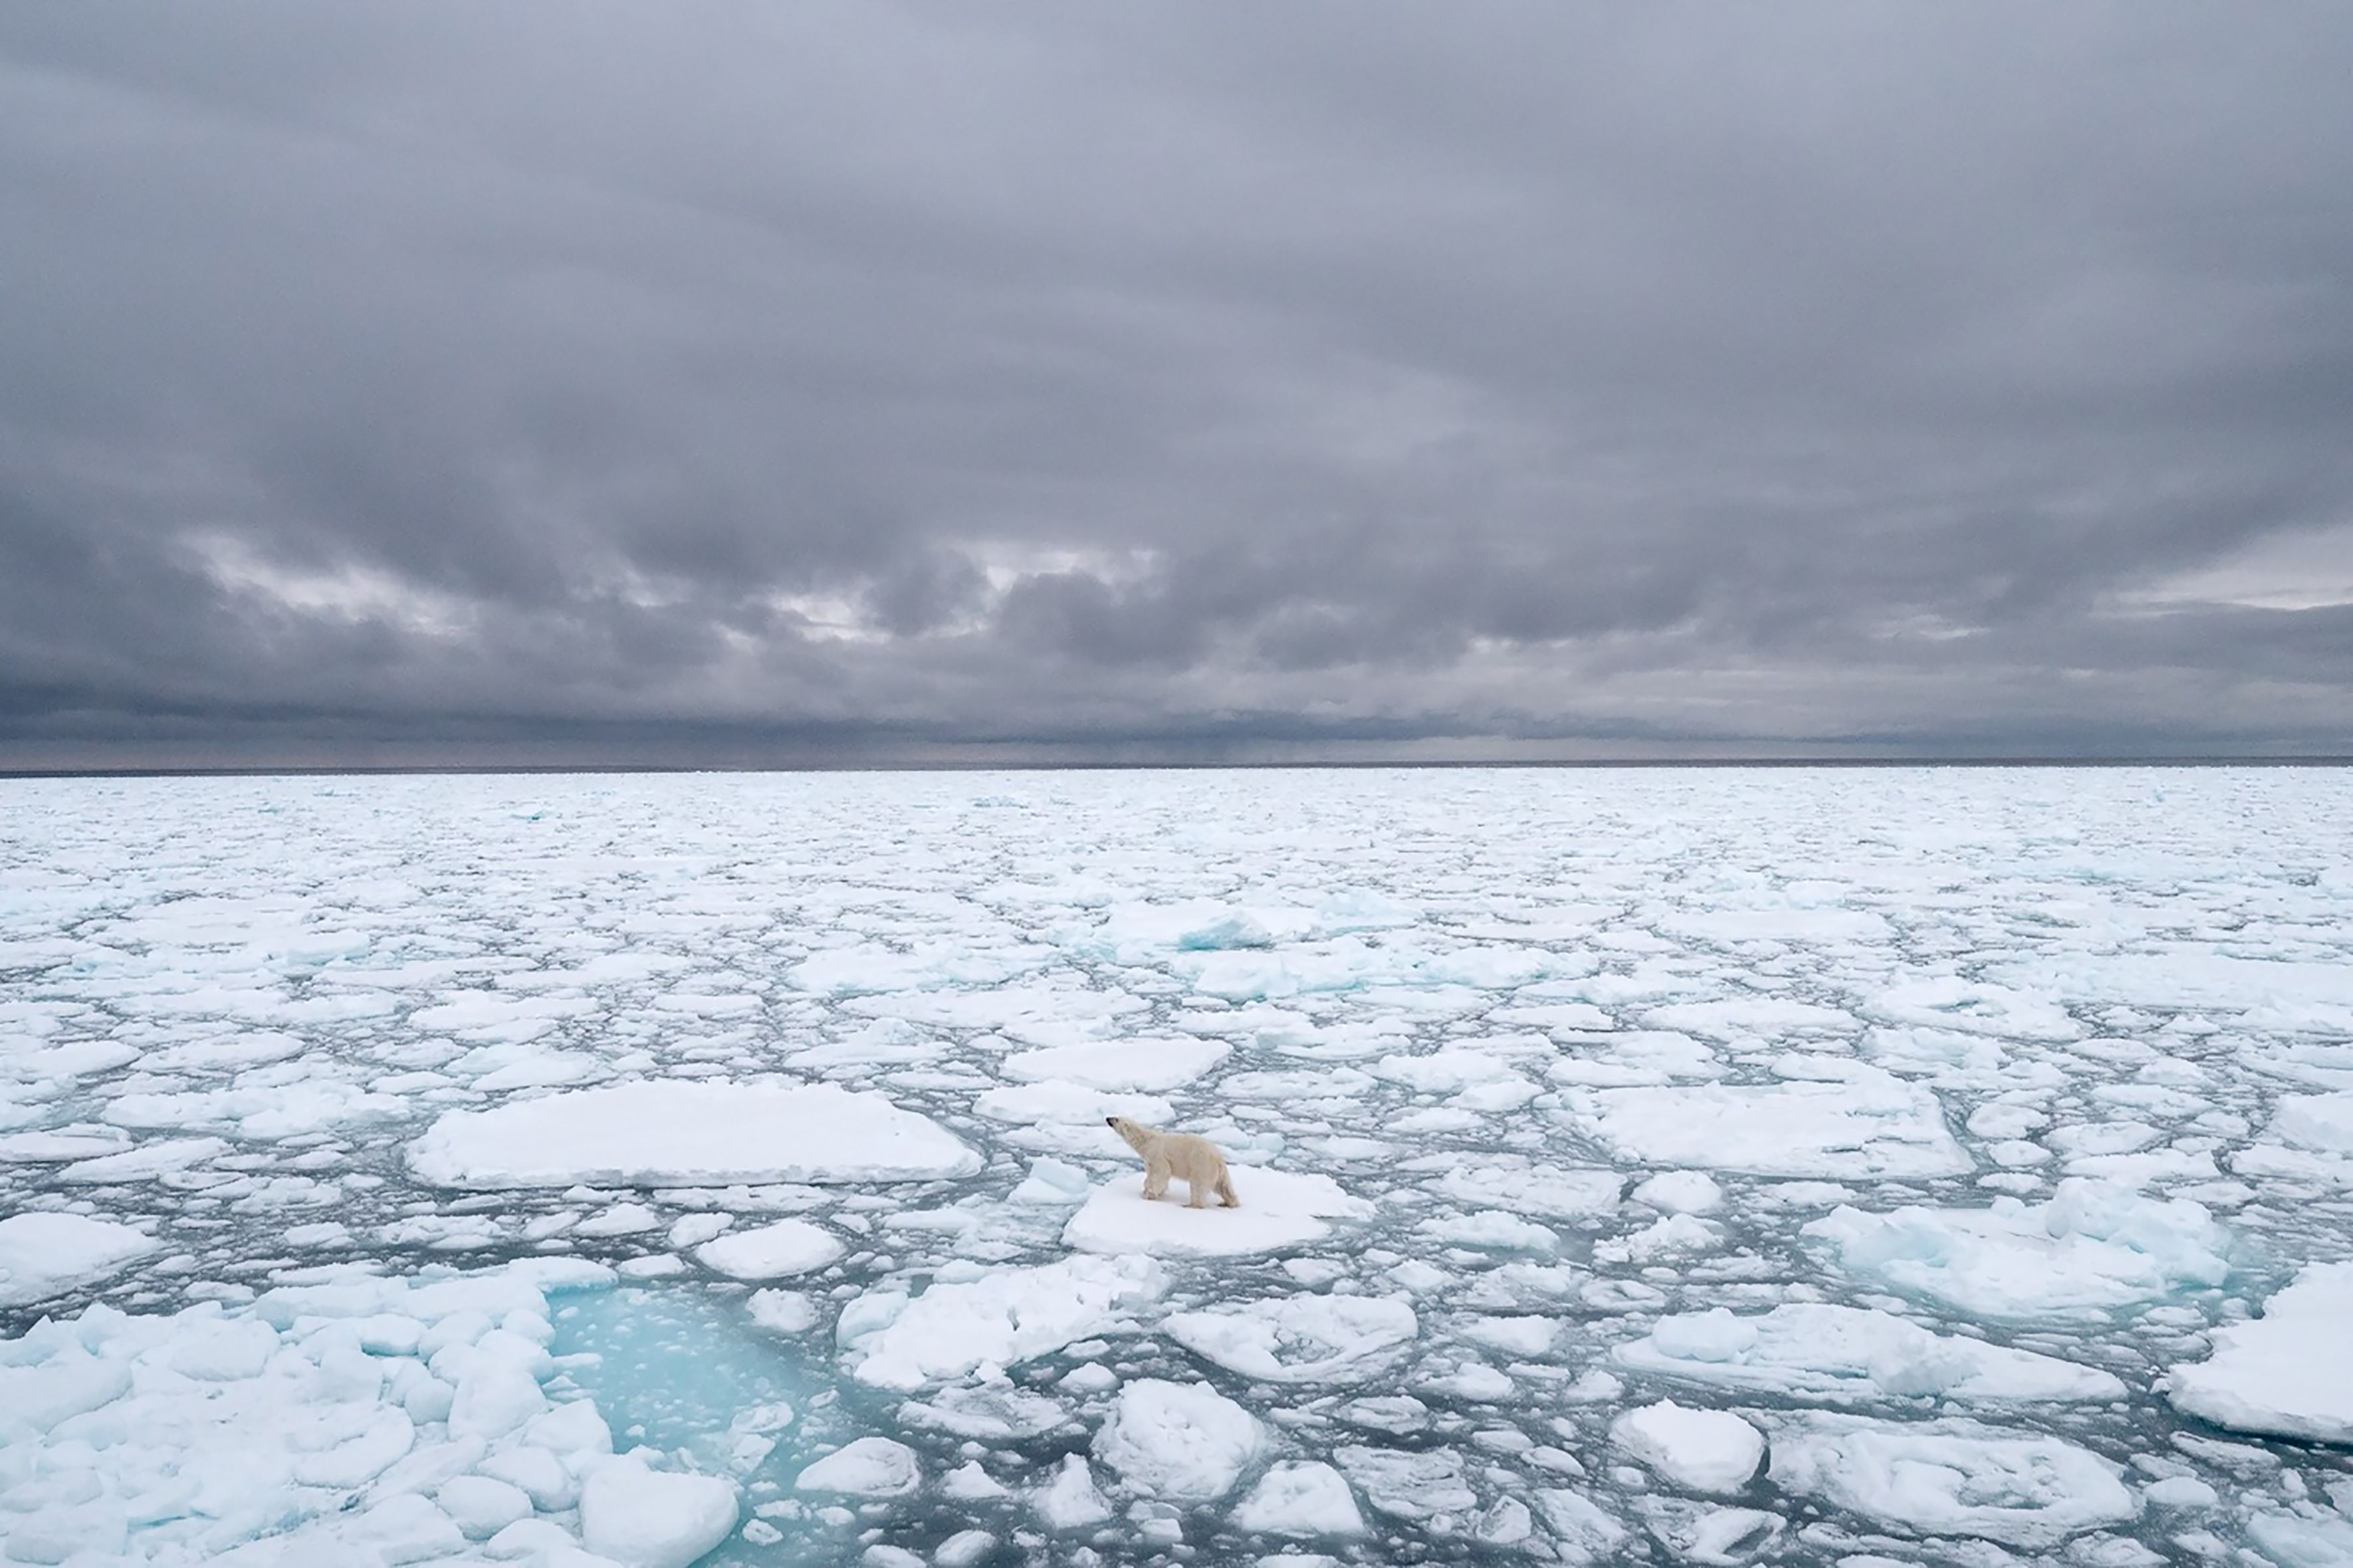 A handout photo made available on July 17, 2020 by Polar Bears International shows a polar bear in Svalbard, Norway, in 2018. - Climate change is starving polar bears into extinction, according to research published on July 20, 2020 that predicts the apex carnivores could all but disappear within the span of a human lifetime. In some regions they are already caught in a vicious downward spiral, with shrinking sea ice cutting short the time bears have for hunting seals, while dwindling body weight undermines their chances of surviving Arctic winters without food, scientists reported in Nature Climate Change. The study calculates "timelines of risk" for different polar bear demographics, exploring two alternative futures with different levels of greenhouse gas emissions and atmospheric concentrations of CO2. If business-as-usual greenhouse gas emissions continue, its likely that all but a few polar bear populations will collapse by 2100. (Photo by BJ KIRSCHHOFFER / POLAR BEARS INTERNATIONAL / AFP) / RESTRICTED TO EDITORIAL USE - MANDATORY CREDIT "AFP PHOTO / Polar Bears International / BJ Kirschhoffer" - NO MARKETING - NO ADVERTISING CAMPAIGNS - DISTRIBUTED AS A SERVICE TO CLIENTS